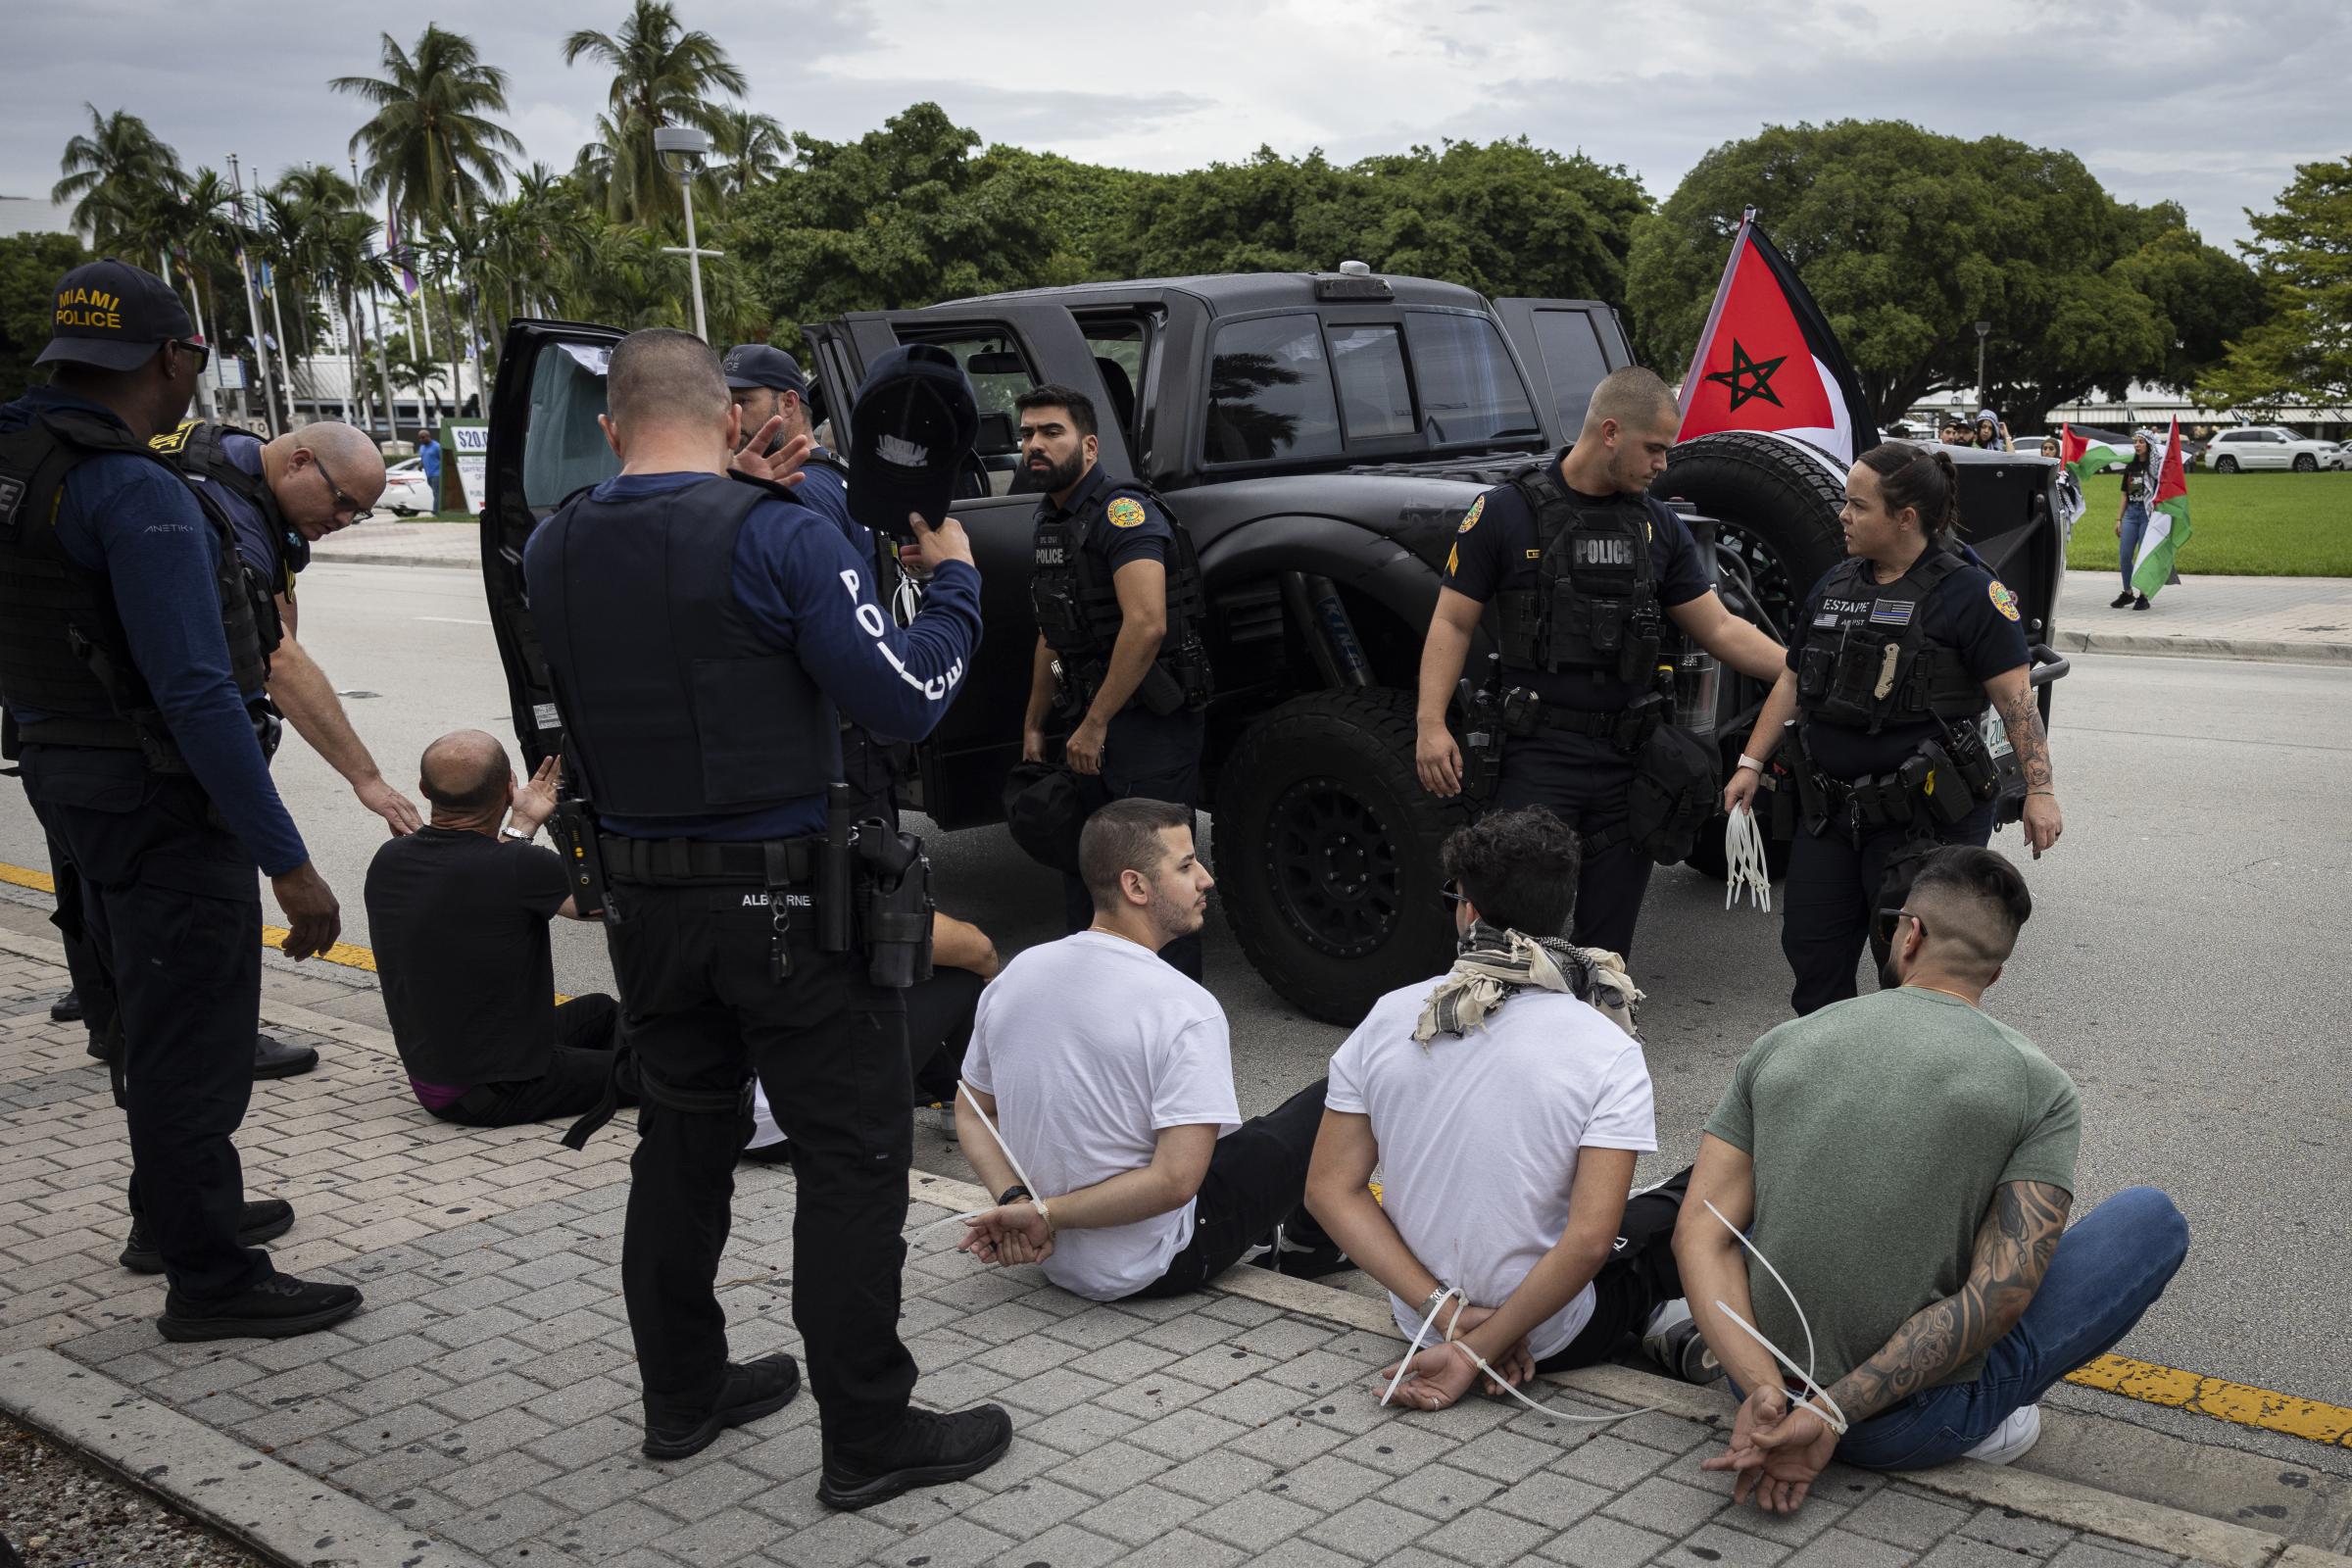 Pro-Palestine demonstration in Miami - Miami Police officers detain men as they arrive at a...